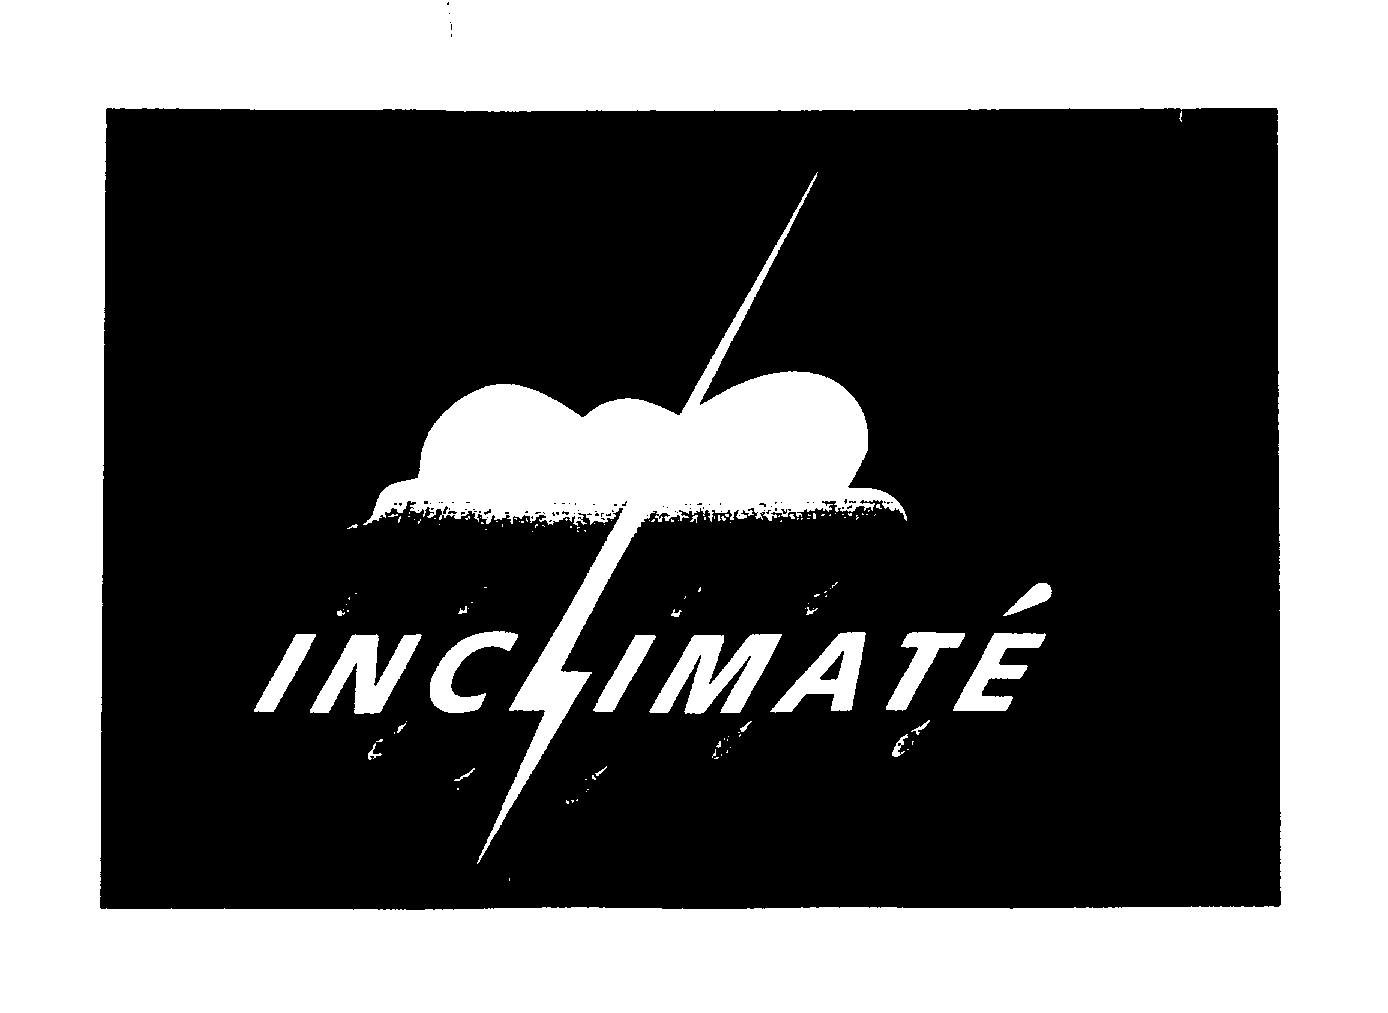  INCLIMATE